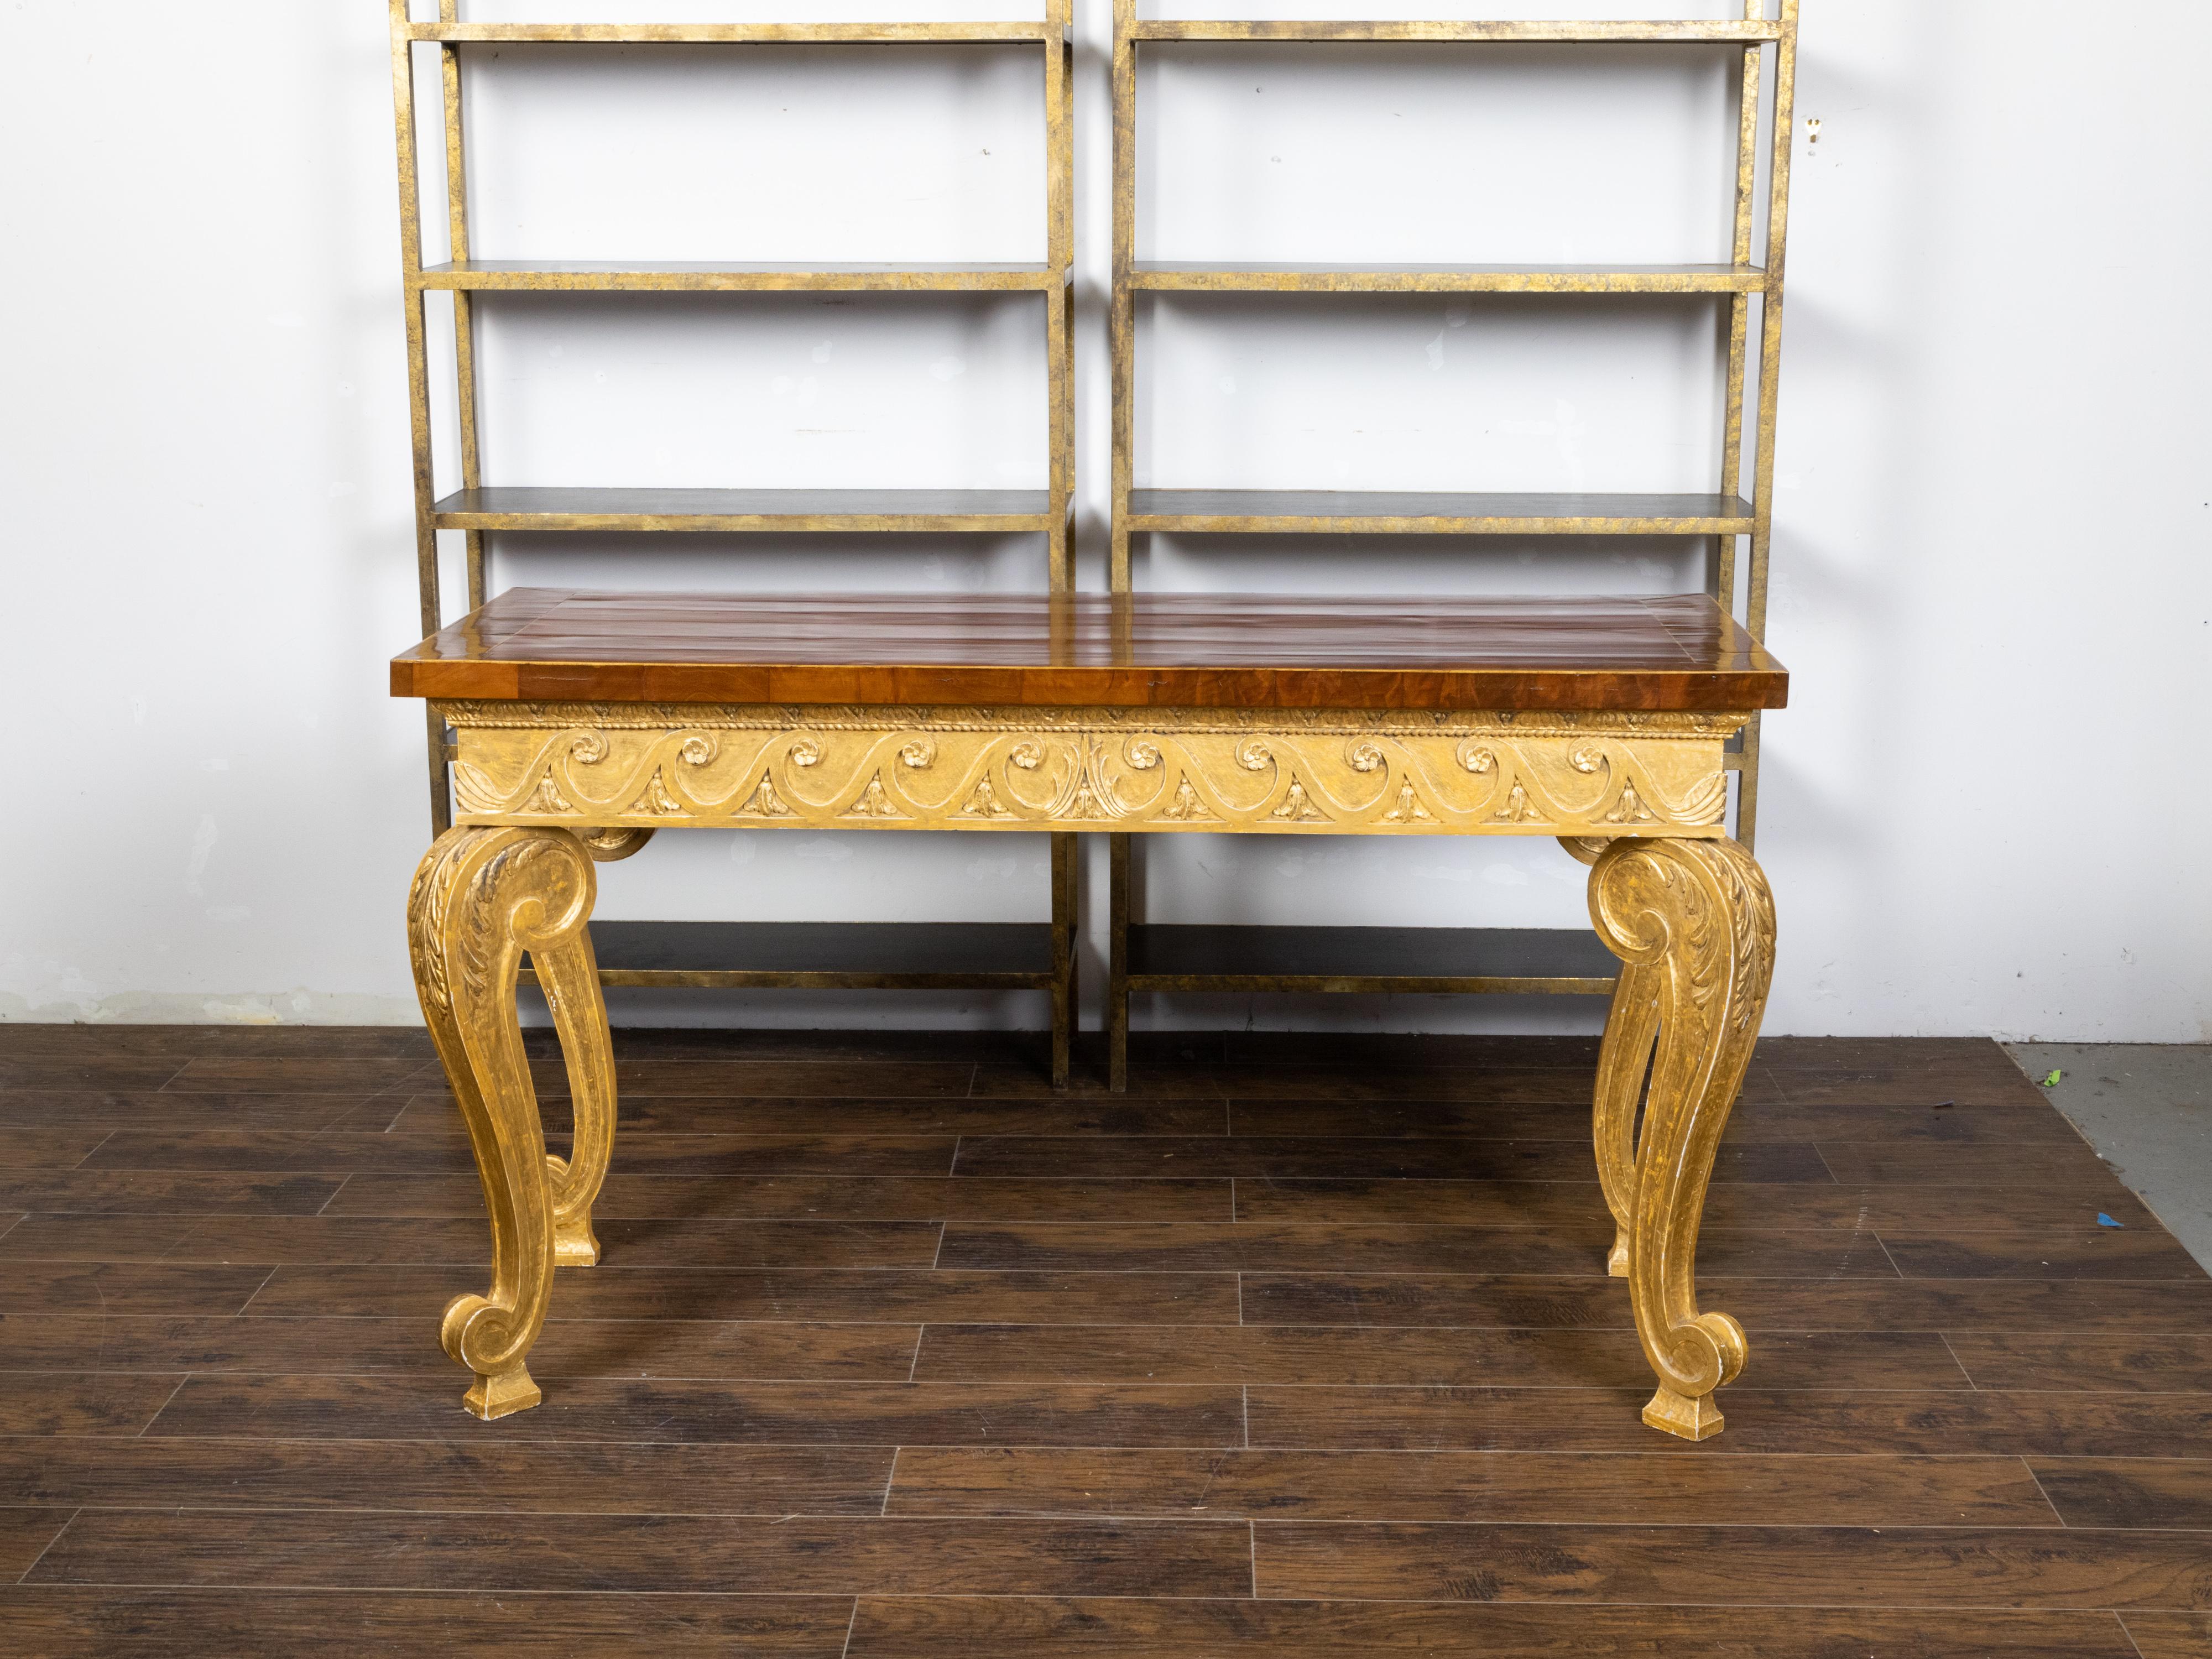 An English giltwood console table from the early 19th century with mahogany veneered top, brass banding, Vitruvian scroll motifs, cabriole legs and acanthus leaves. Created in England during the early years of the 19th century, this console table